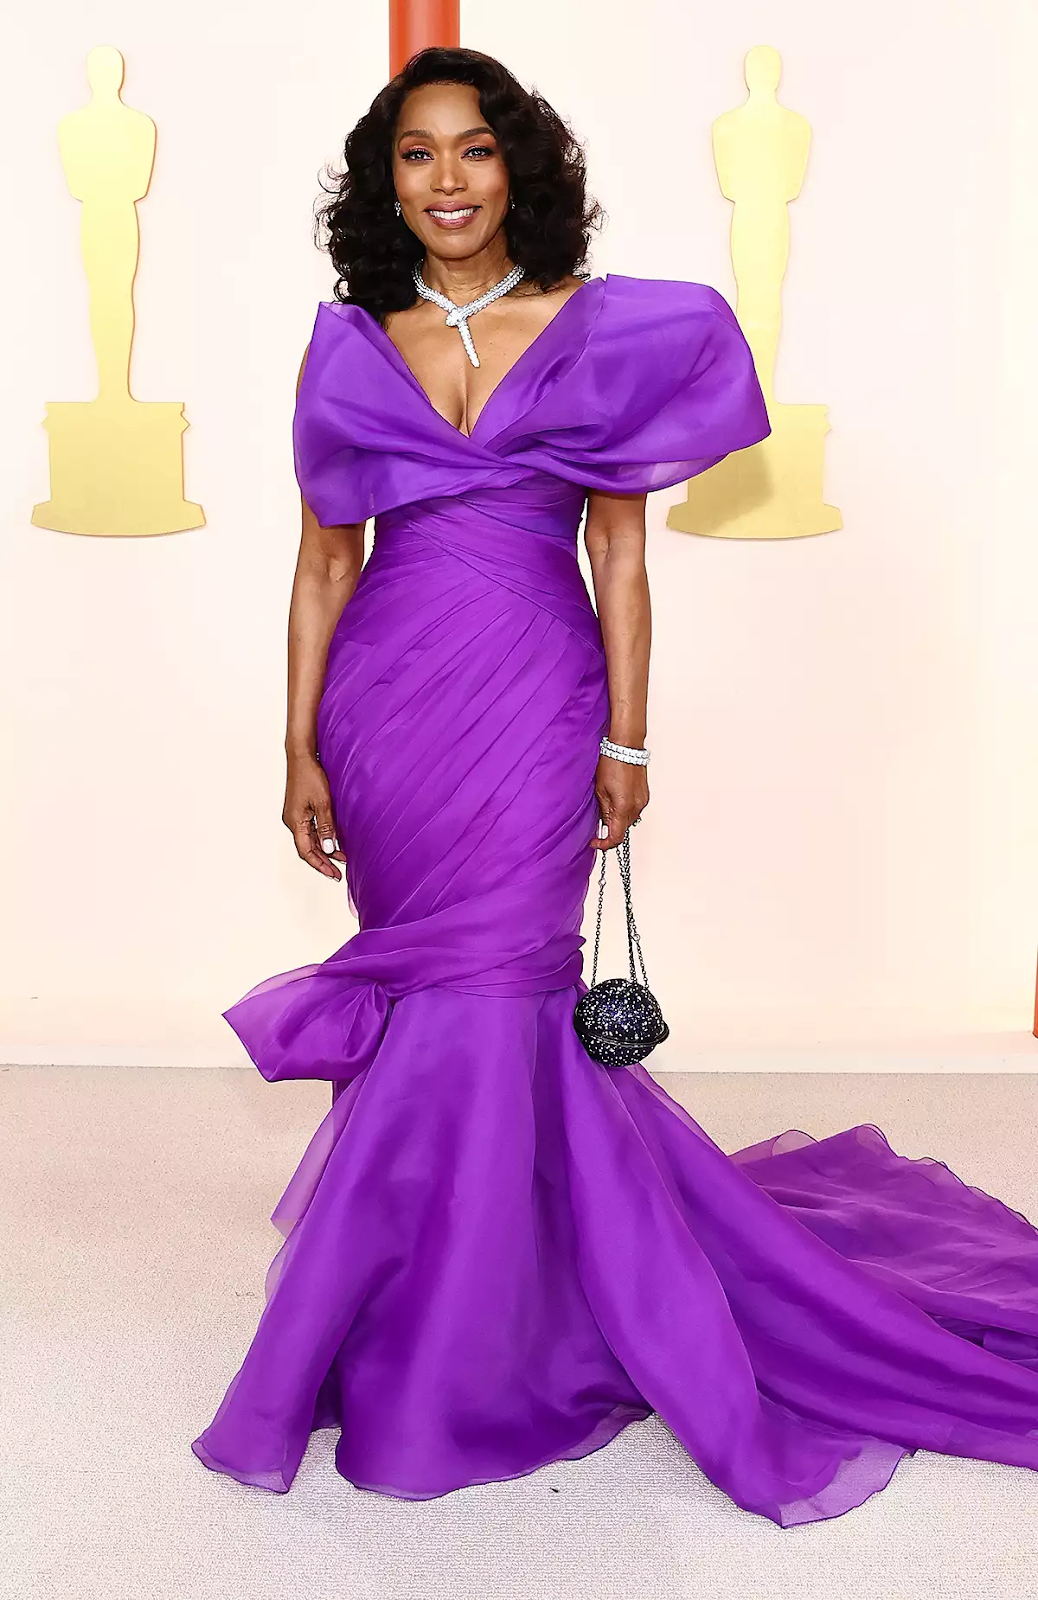 Angela Bassett looked regal and gorgeous in Moschino for the Oscars 2023.